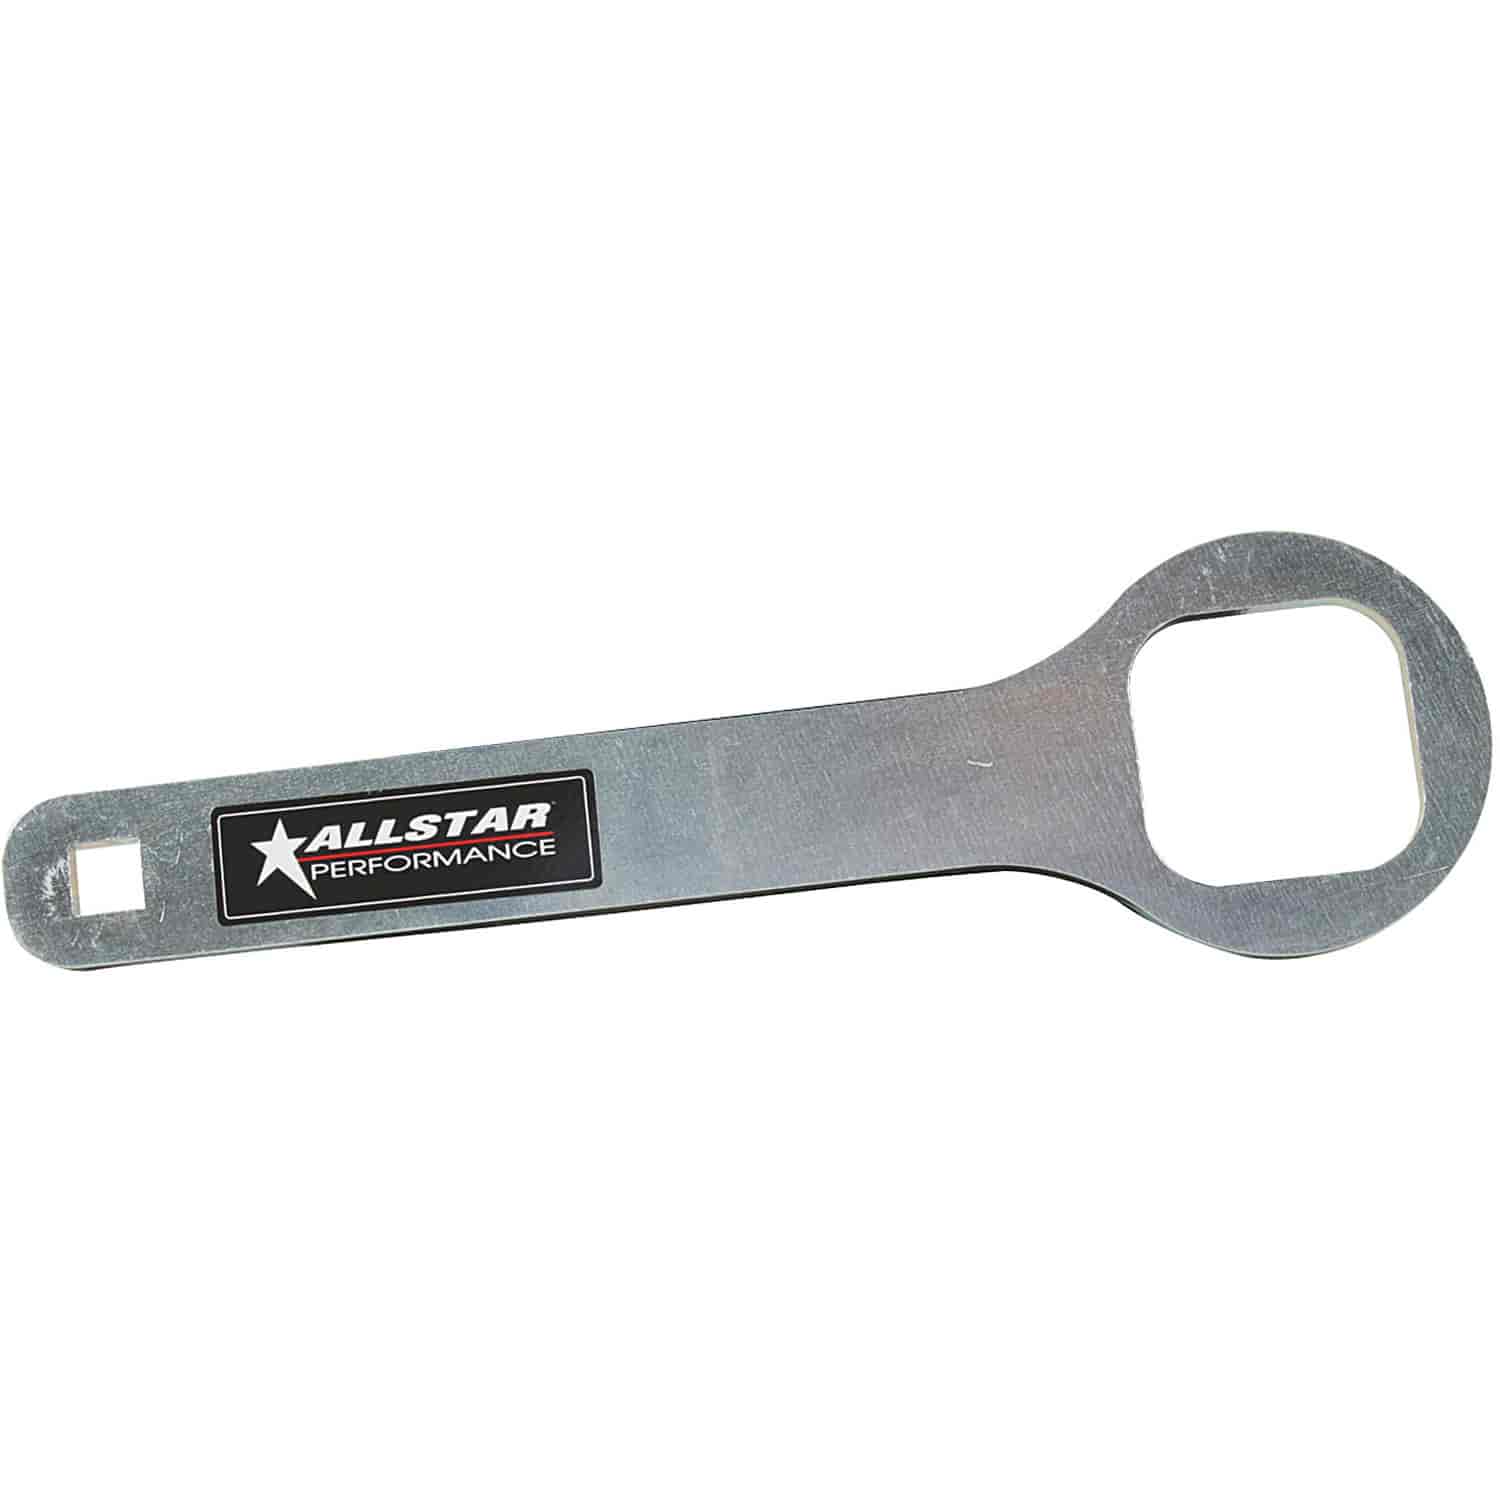 Upper Ball Joint Wrench For Ball Joints That Are 1.900" Wide